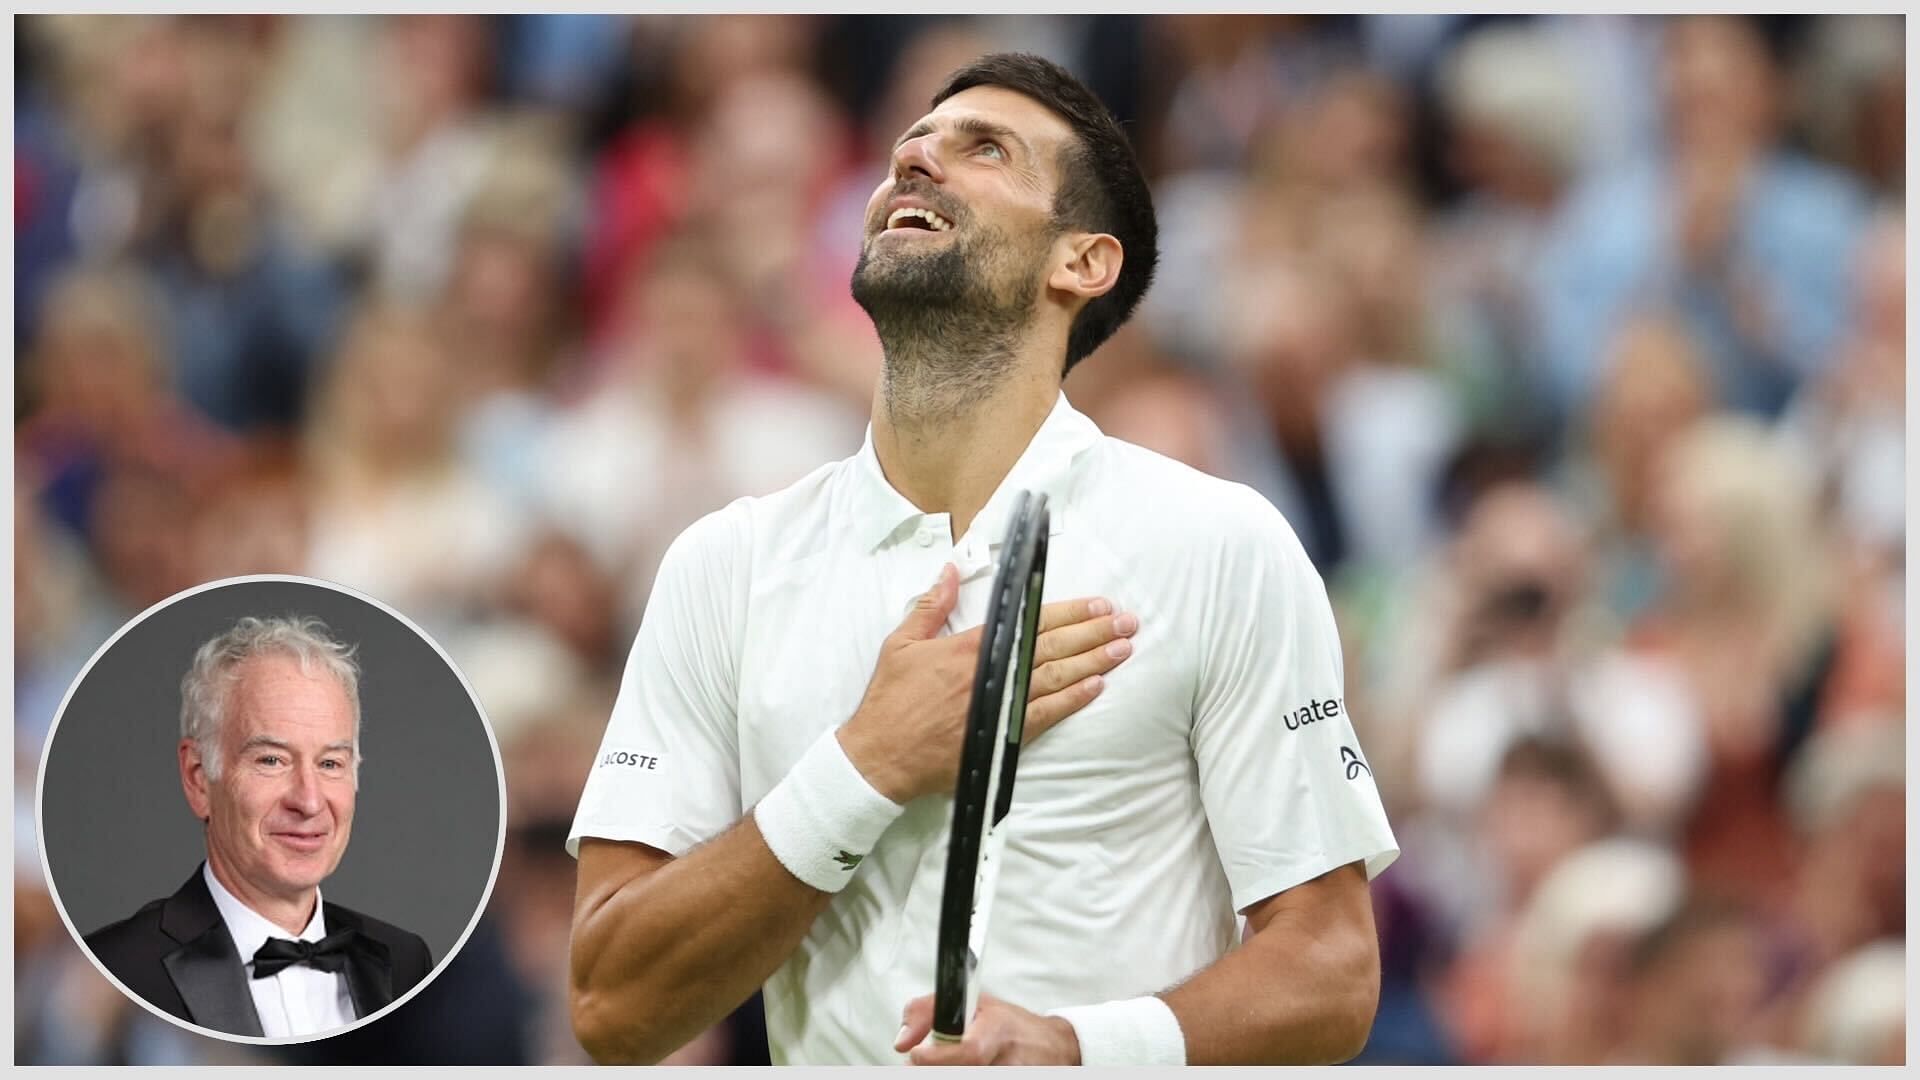 ohn McEnroe has defended Novak Djokovic and slammed the match official following a controversial Wimbledon call.